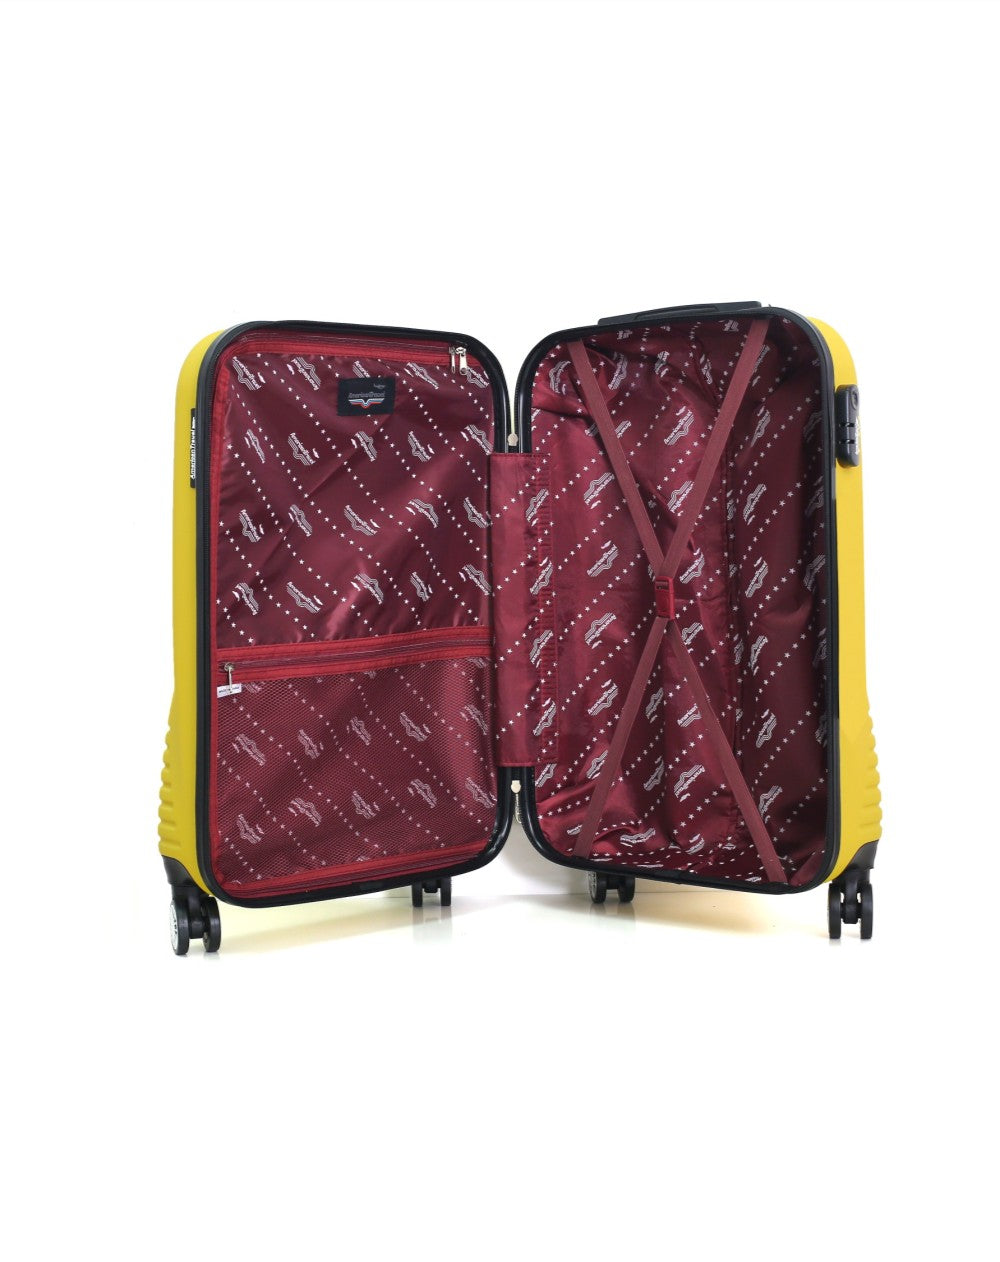 Valise Cabine ABS DC 4 Roues 55 cm